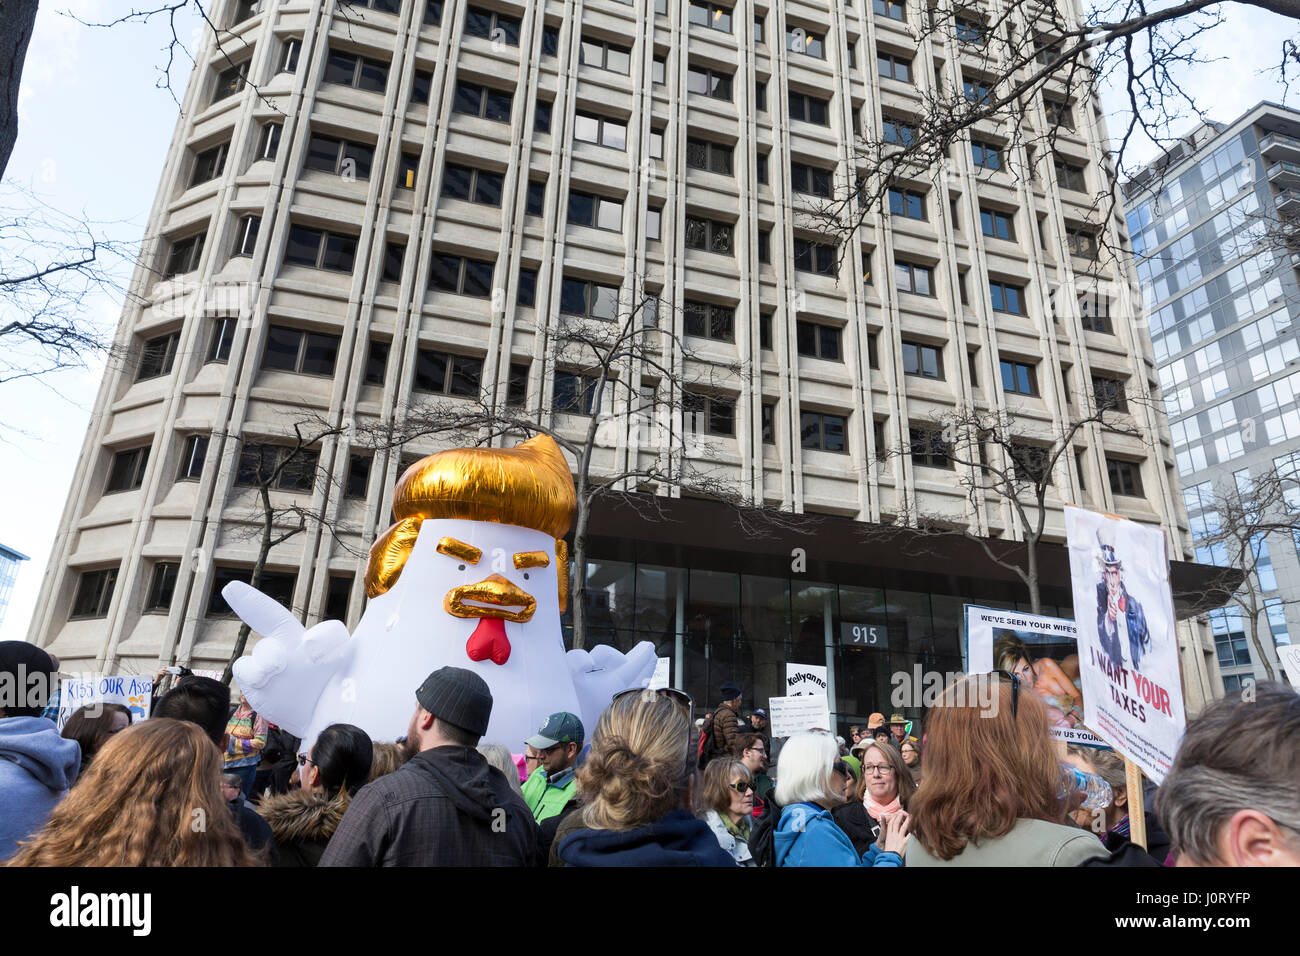 Seattle, Washington, USA. 15th April, 2017. "Chicken Don" statue appears at the rally at the Henry M. Jackson Federal Building. Hundreds of protestors attended Tax March Seattle, a rally and sister march to the National Tax March taking place in over 180 communities across the U.S. Activists are demanding that President Trump release his tax returns and reveal his business dealings, financial ties, and any potential conflicts of interests. Credit: Paul Gordon/Alamy Live News Stock Photo